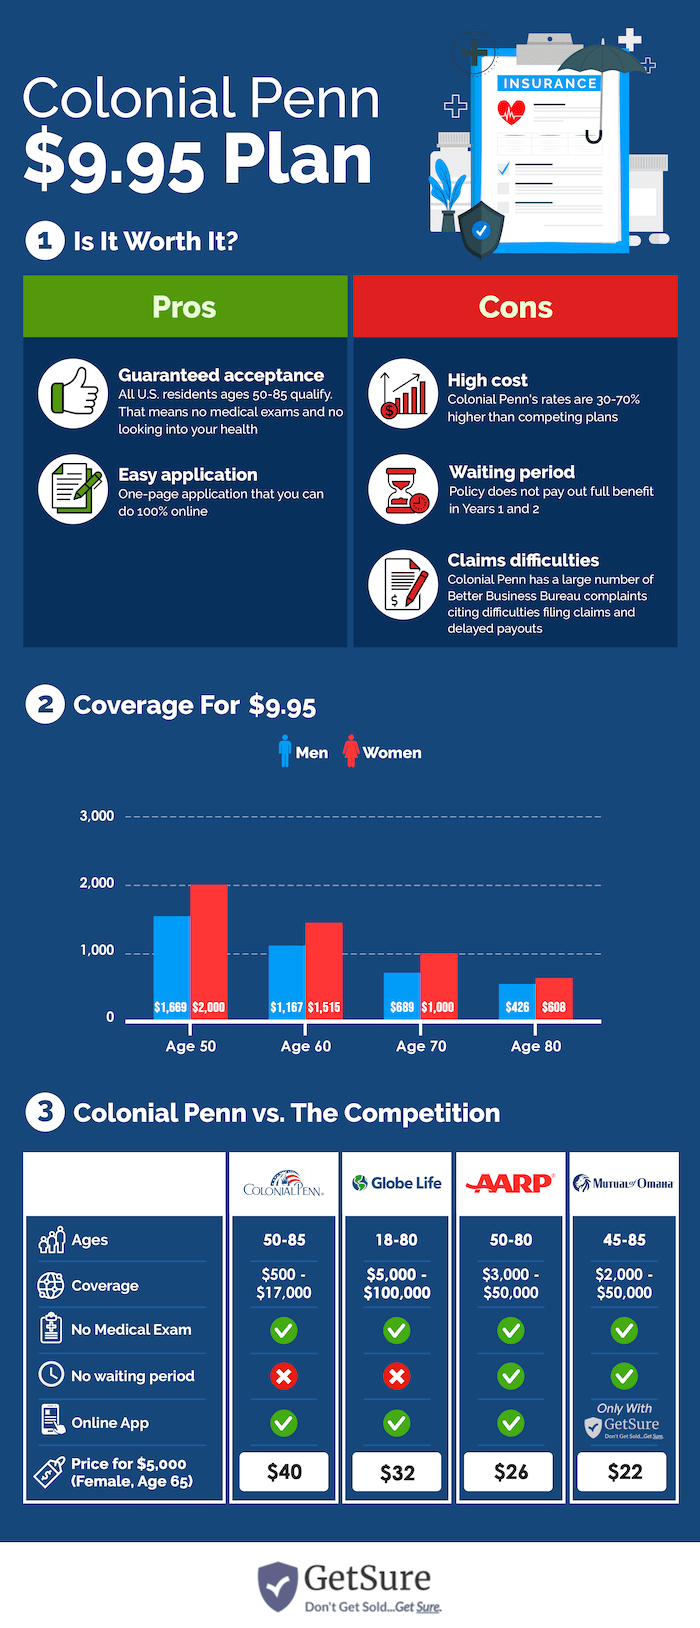 This infographic is split into three sections: (1) the first looks at the pros and cons of the 995 plan, (2) the second shows how much one unit of coverage is for men and women ages 50-85, and (3) the third shows a comparison of Colonial Penn's Plan to other well-known life insurance options for seniors